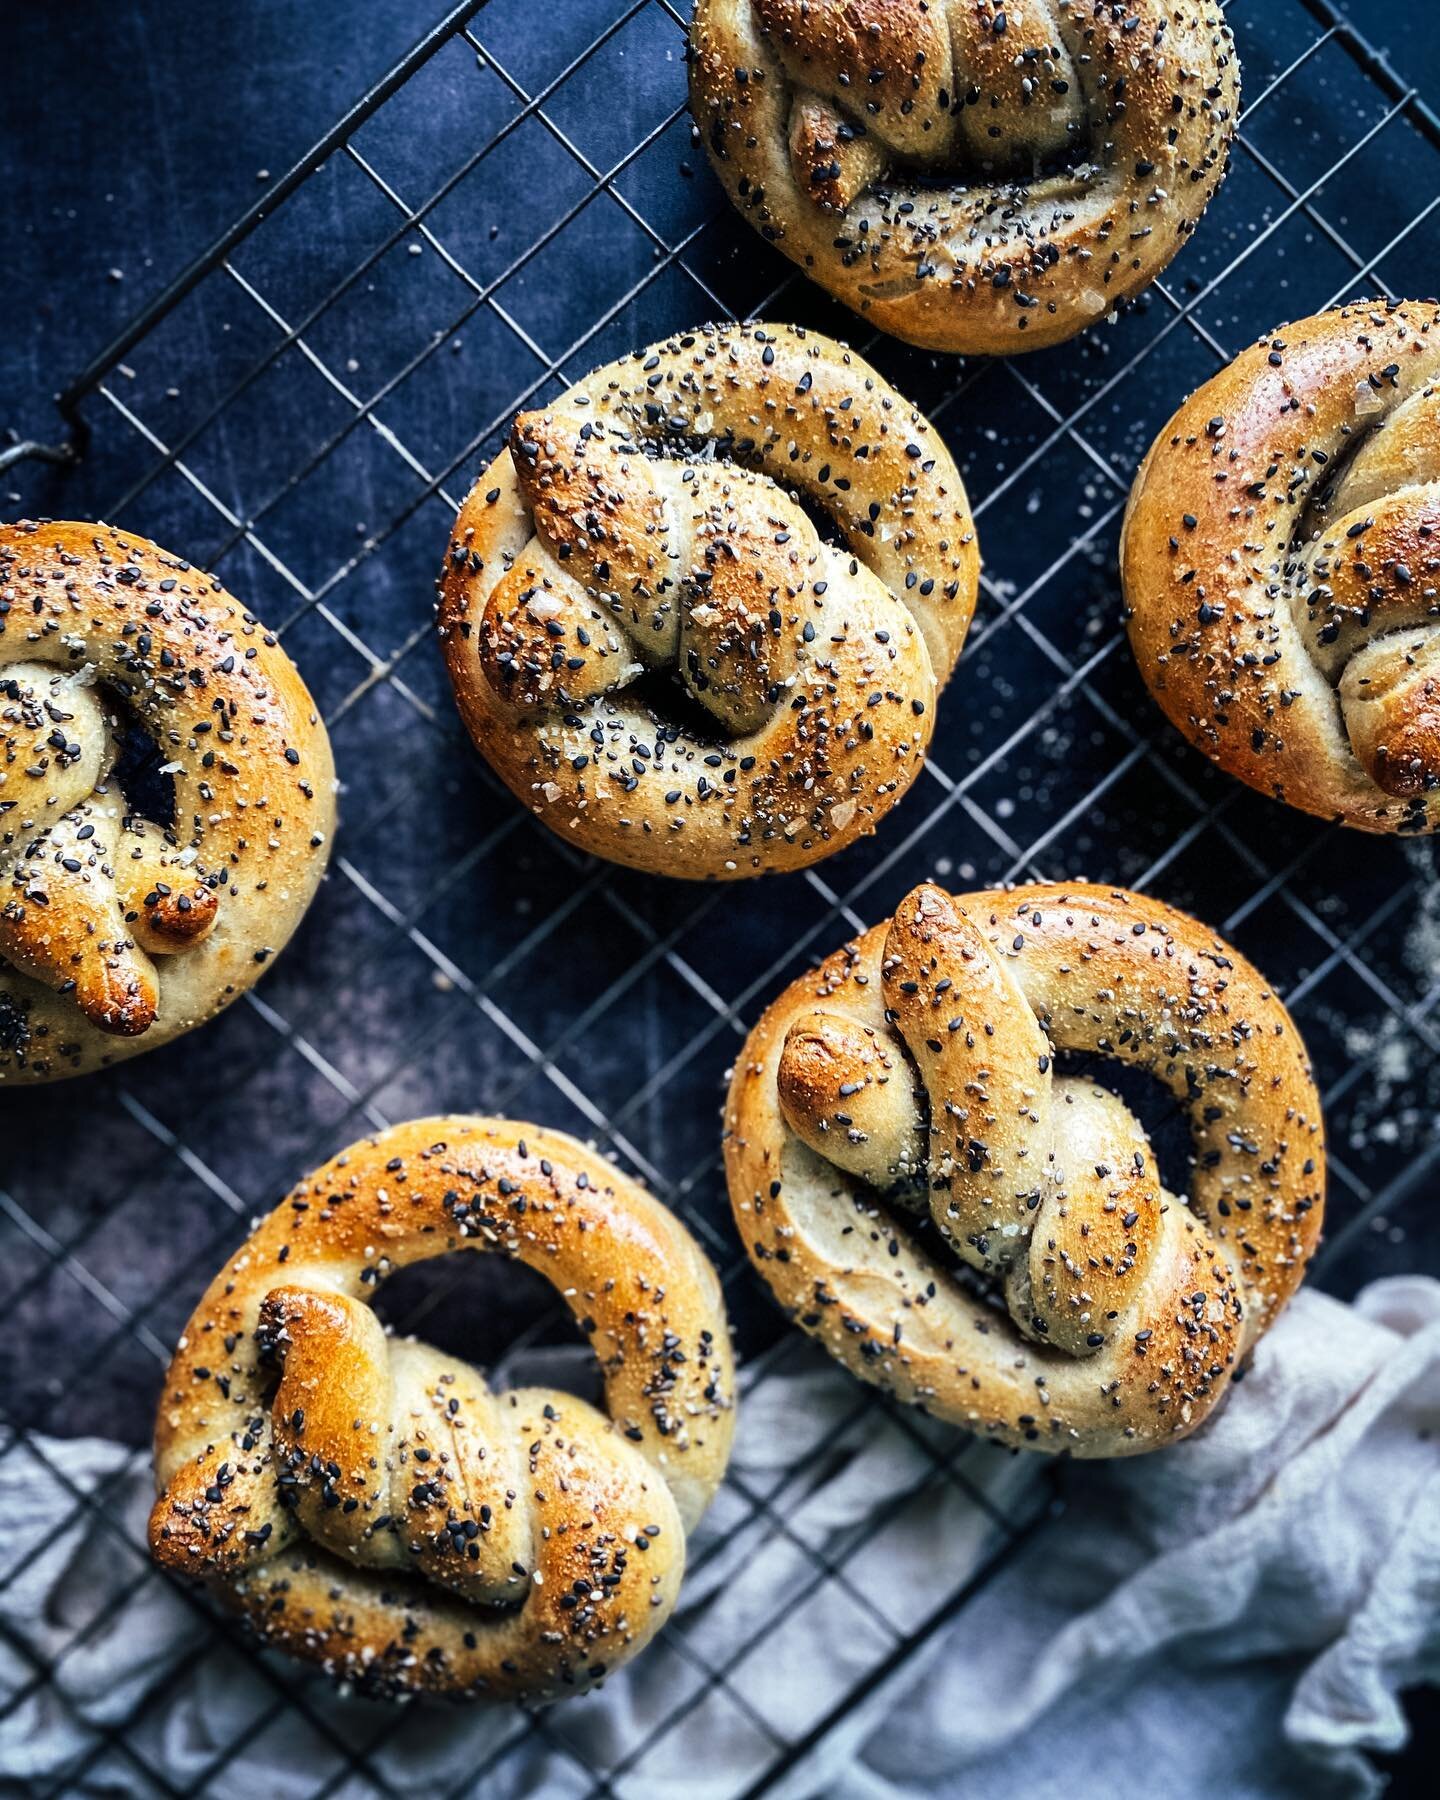 Everything Bagel seasoned Sourdough Pretzels 🥨. Have been testing a new recipe for these super easy pretzels. A great addition to the lunchboxes now the kids are back in school. 

#sourdough #sourdoughbaking #experimentingwithsourdough #adventuresin